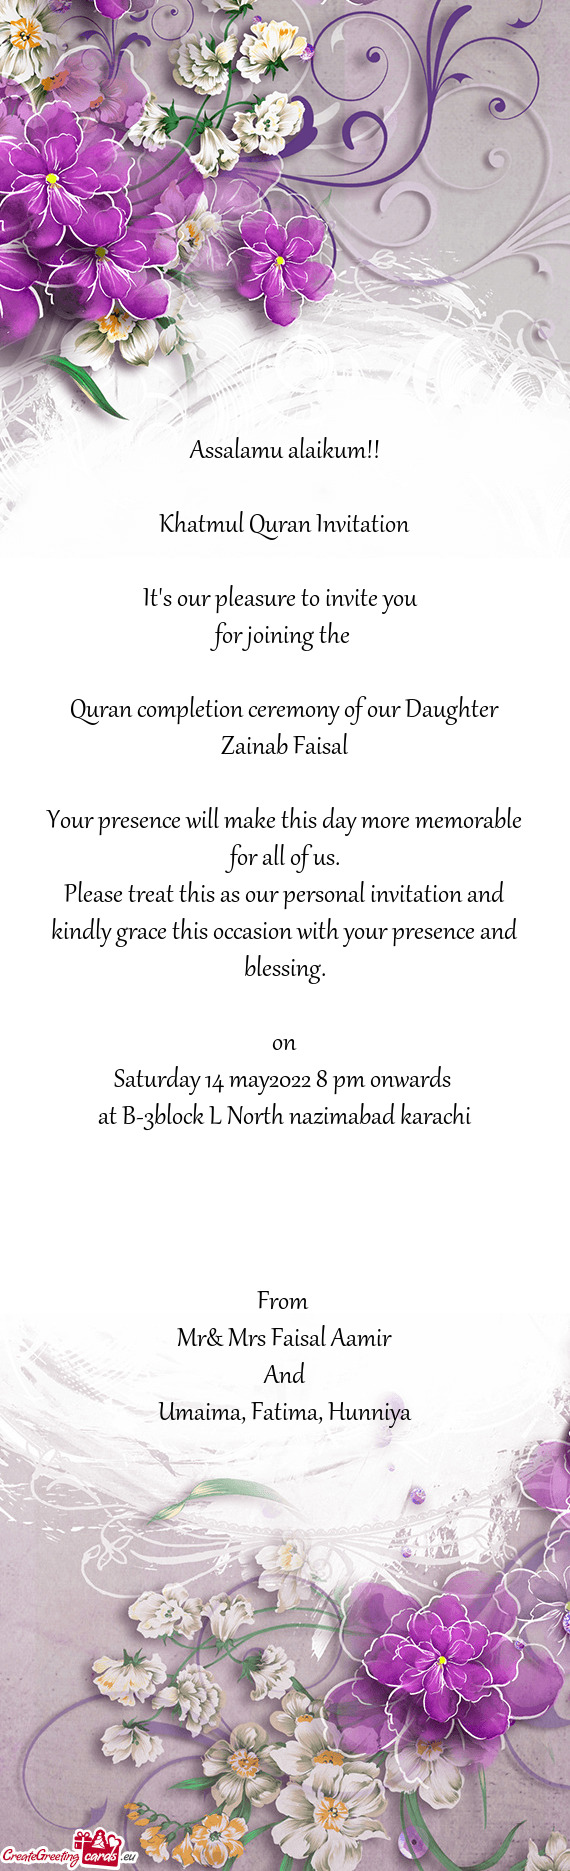 Quran completion ceremony of our Daughter Zainab Faisal